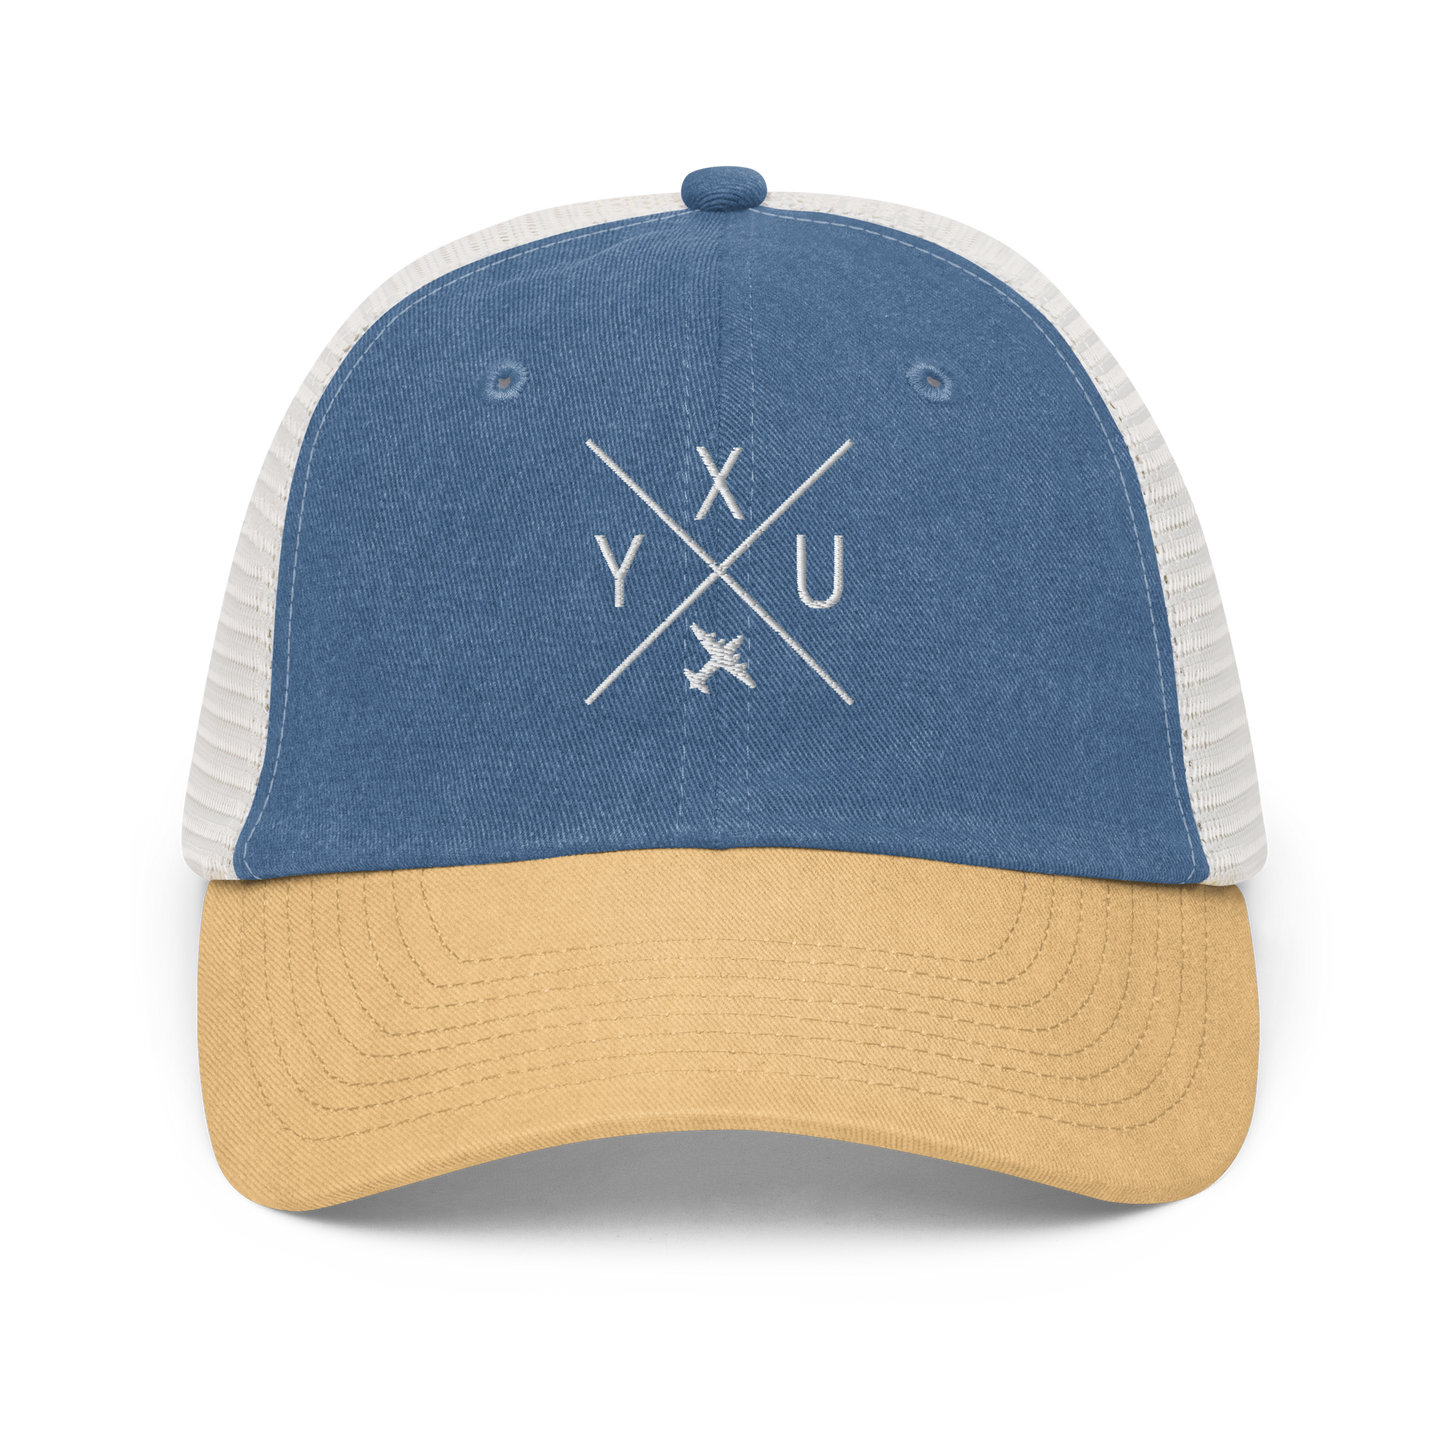 YHM Designs - YXU London Pigment-Dyed Trucker Cap - Crossed-X Design with Airport Code and Vintage Propliner - White Embroidery - Image 01